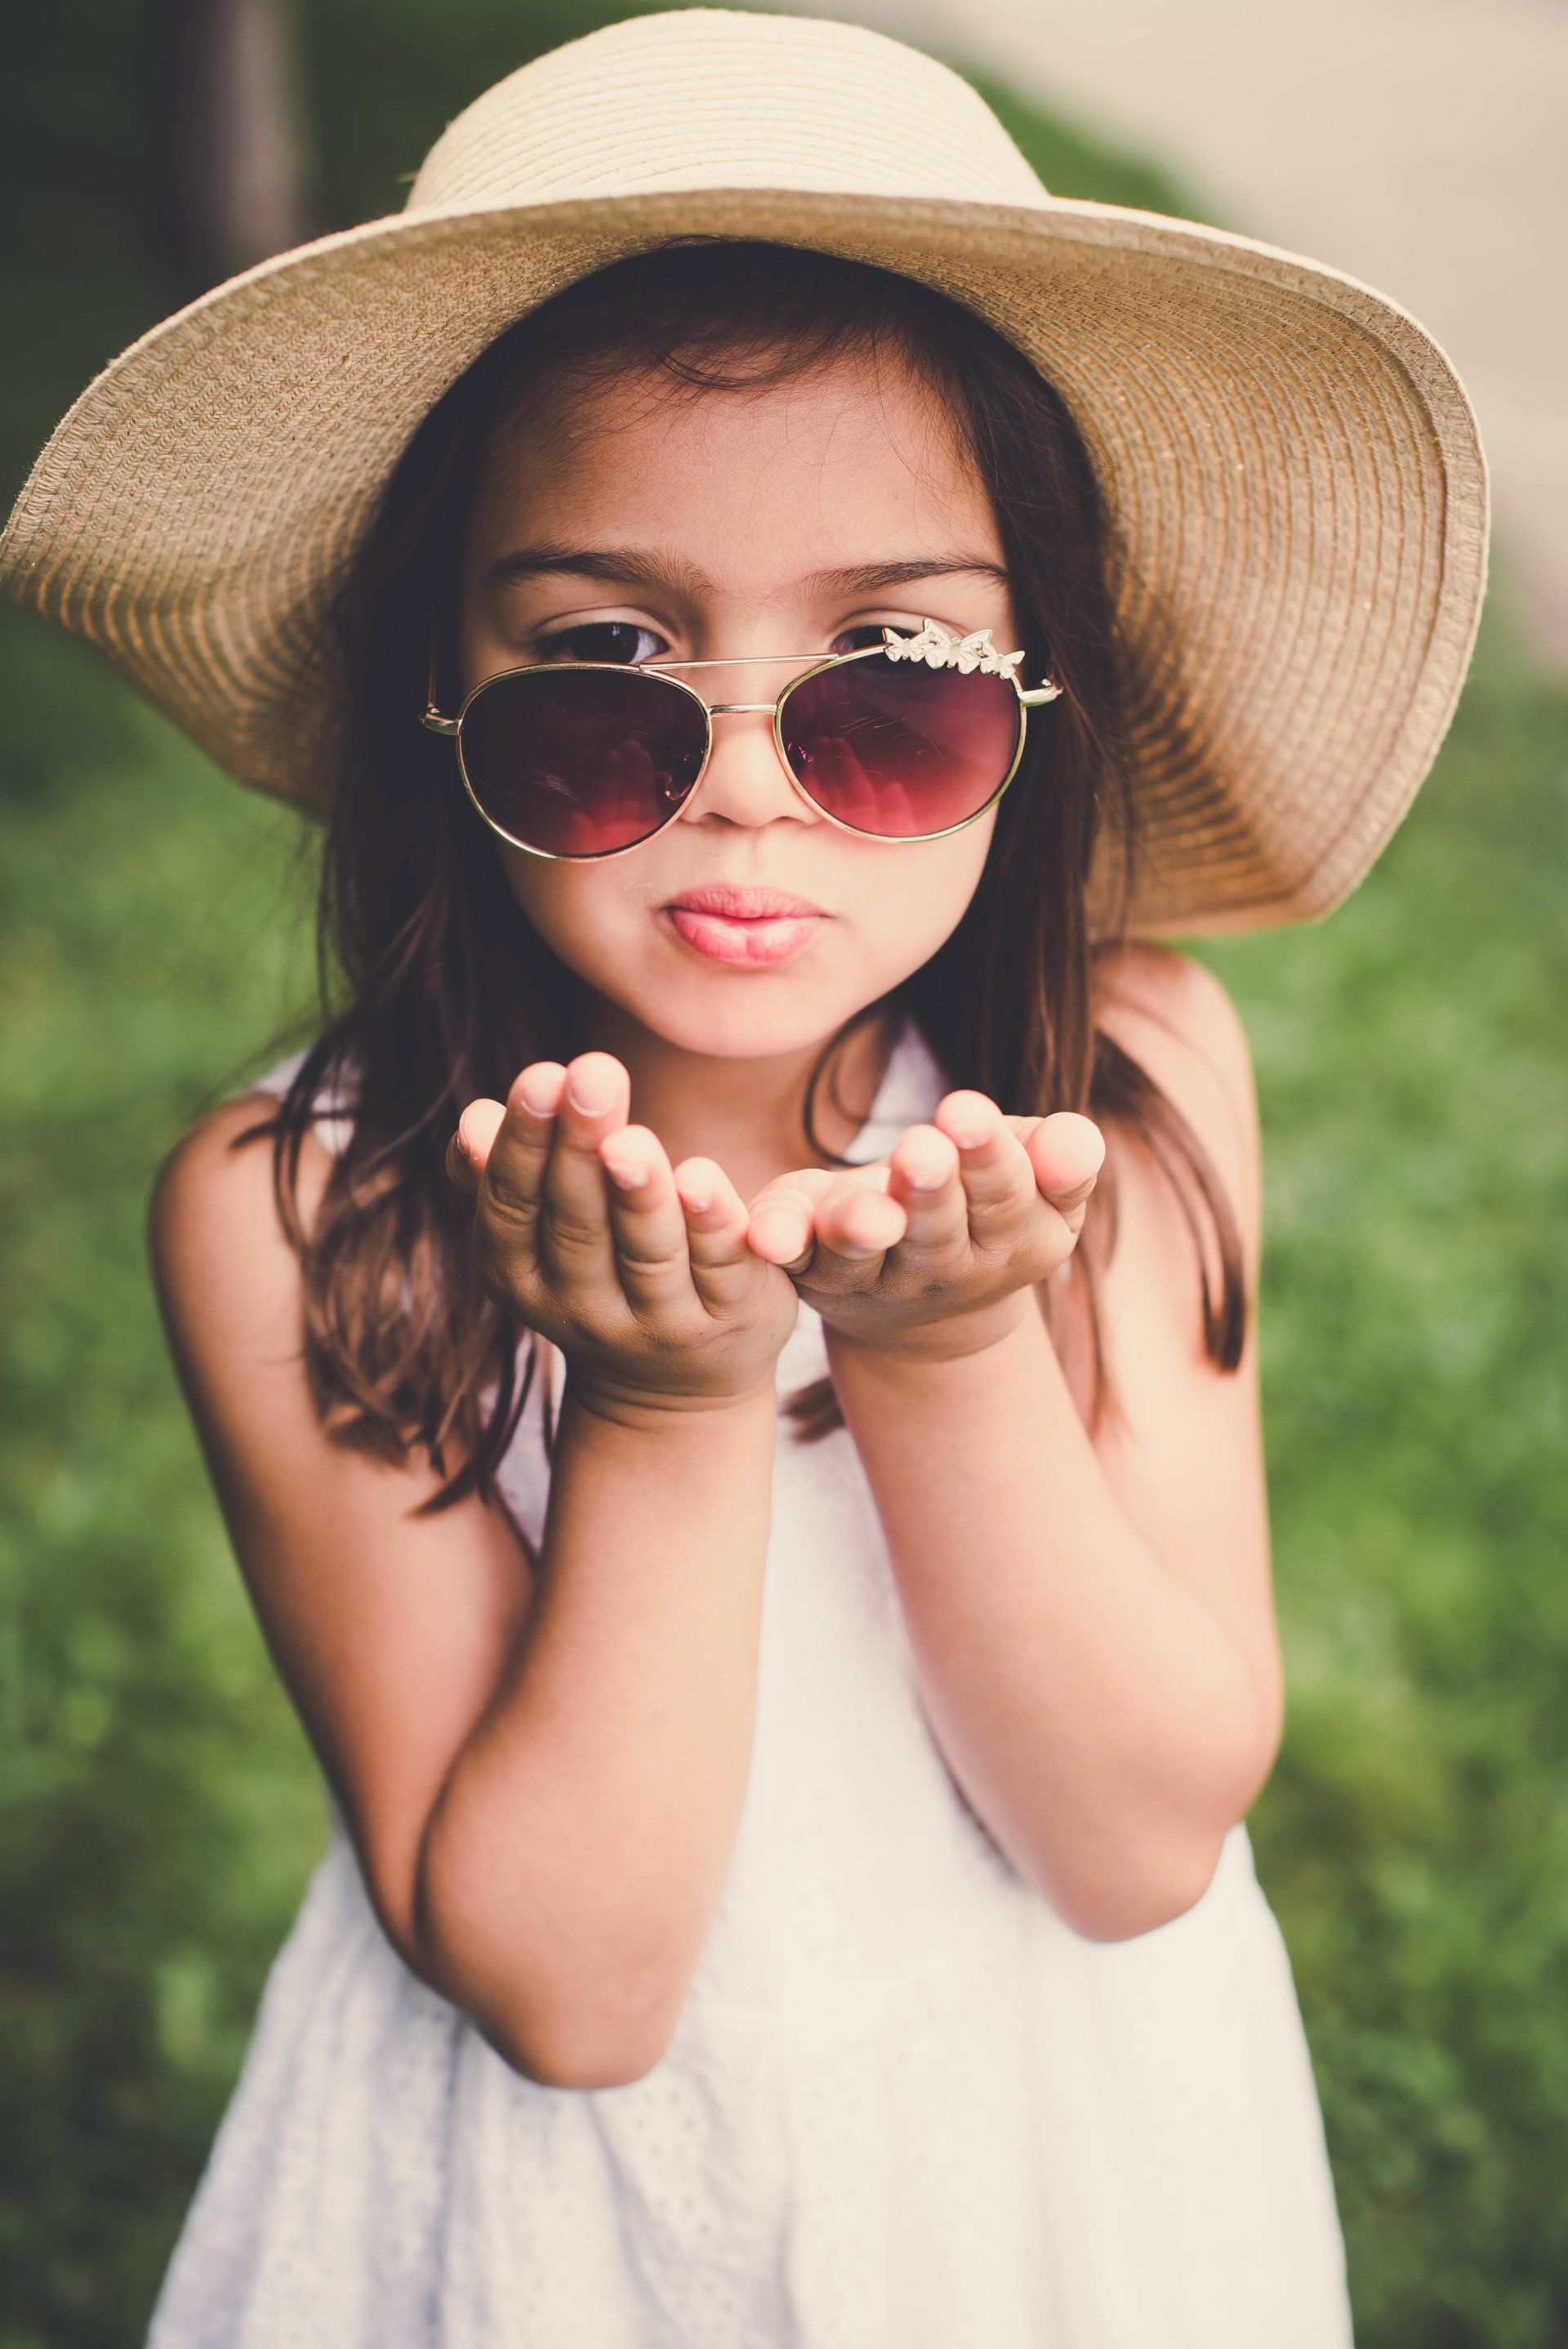 Girl with hat and sunglasses  |  Child photography | Stacey Naglie Toronto